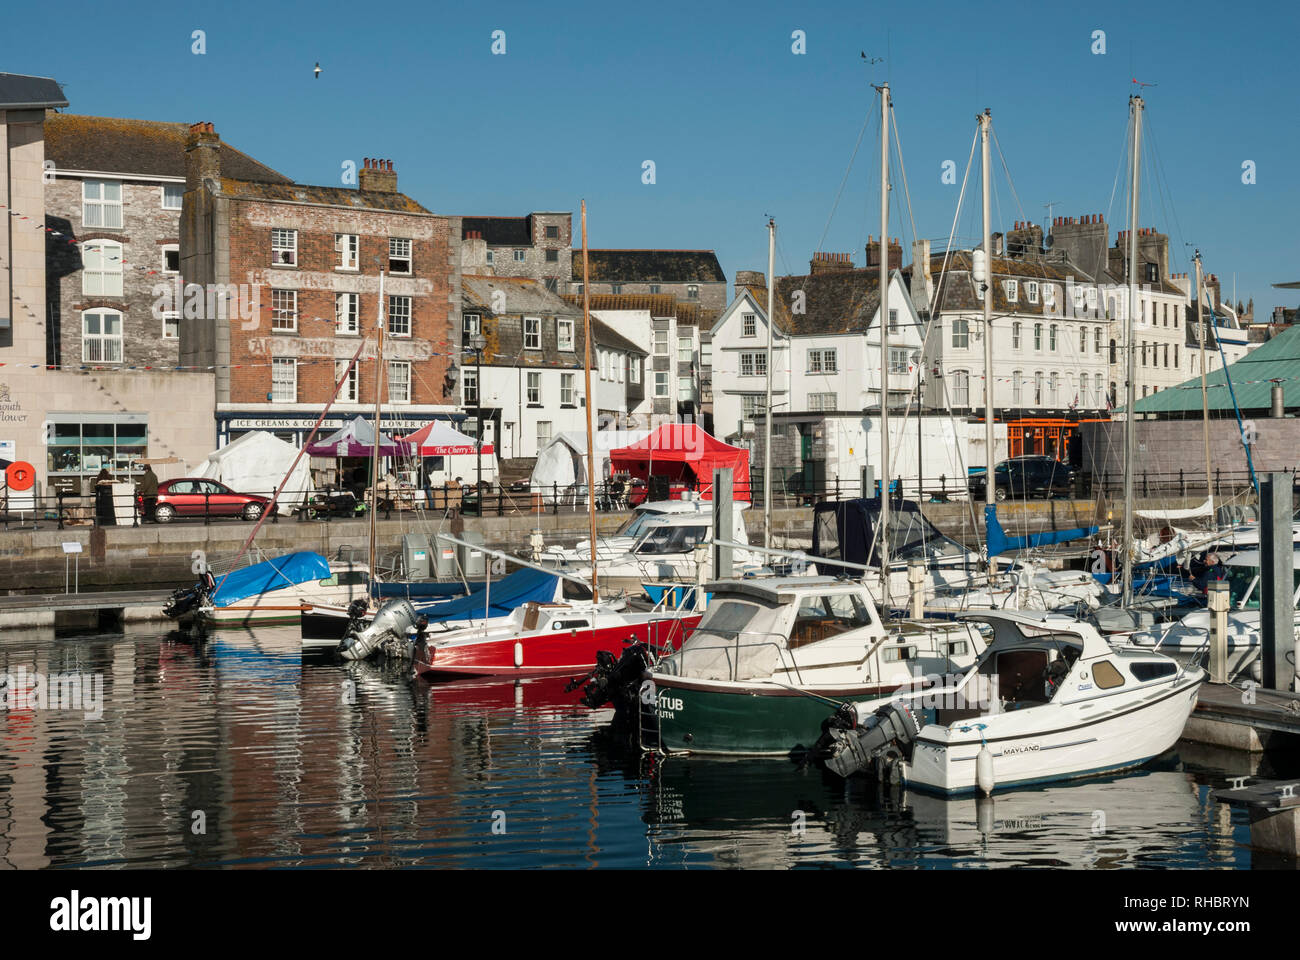 View across Barbican Marina/ Sutton Harbour, Barbican Plymouth. A sunny spring day with moored pleasure boats and historic buildings Stock Photo